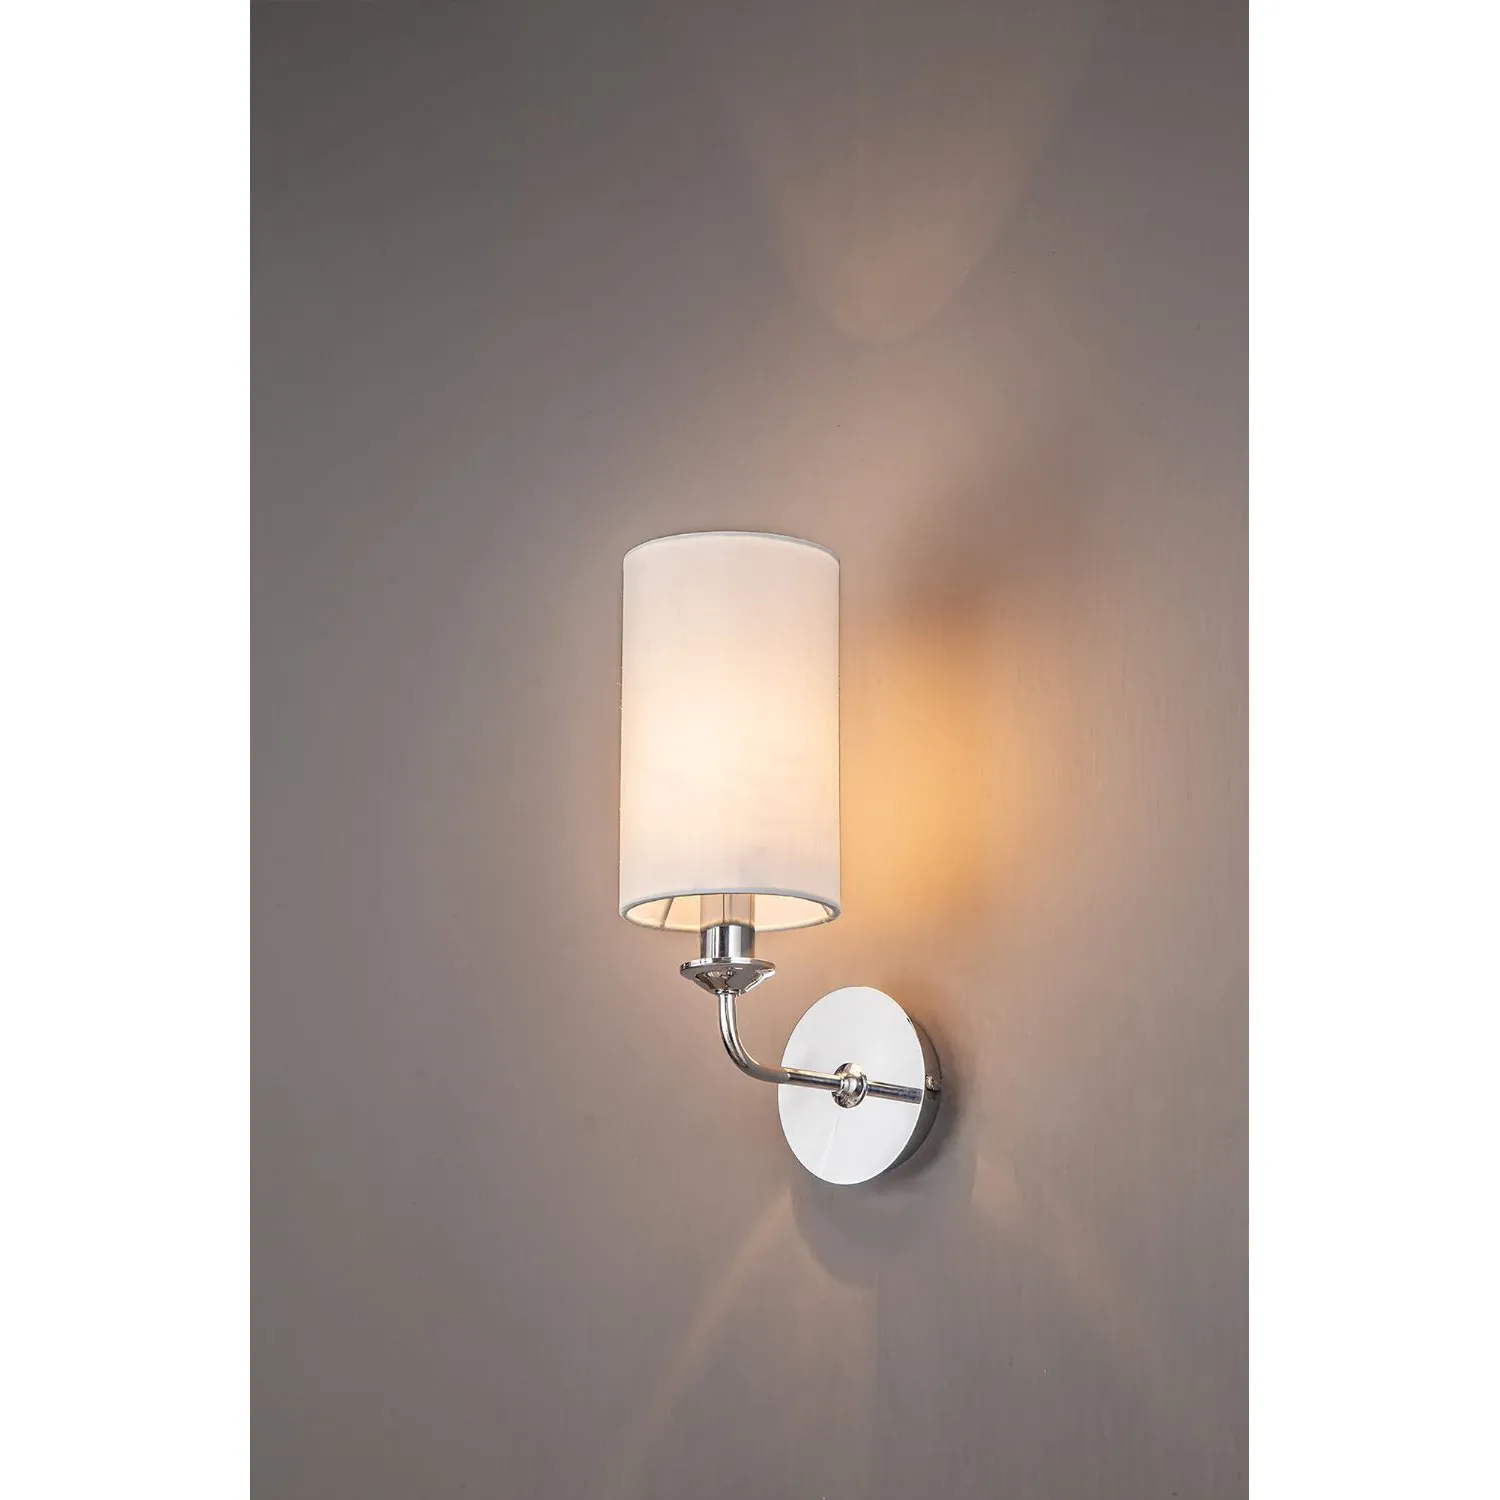 Banyan 1 Light Switched Wall Lamp, E14 Polished Chrome c w 120mm Faux Silk Shade, White